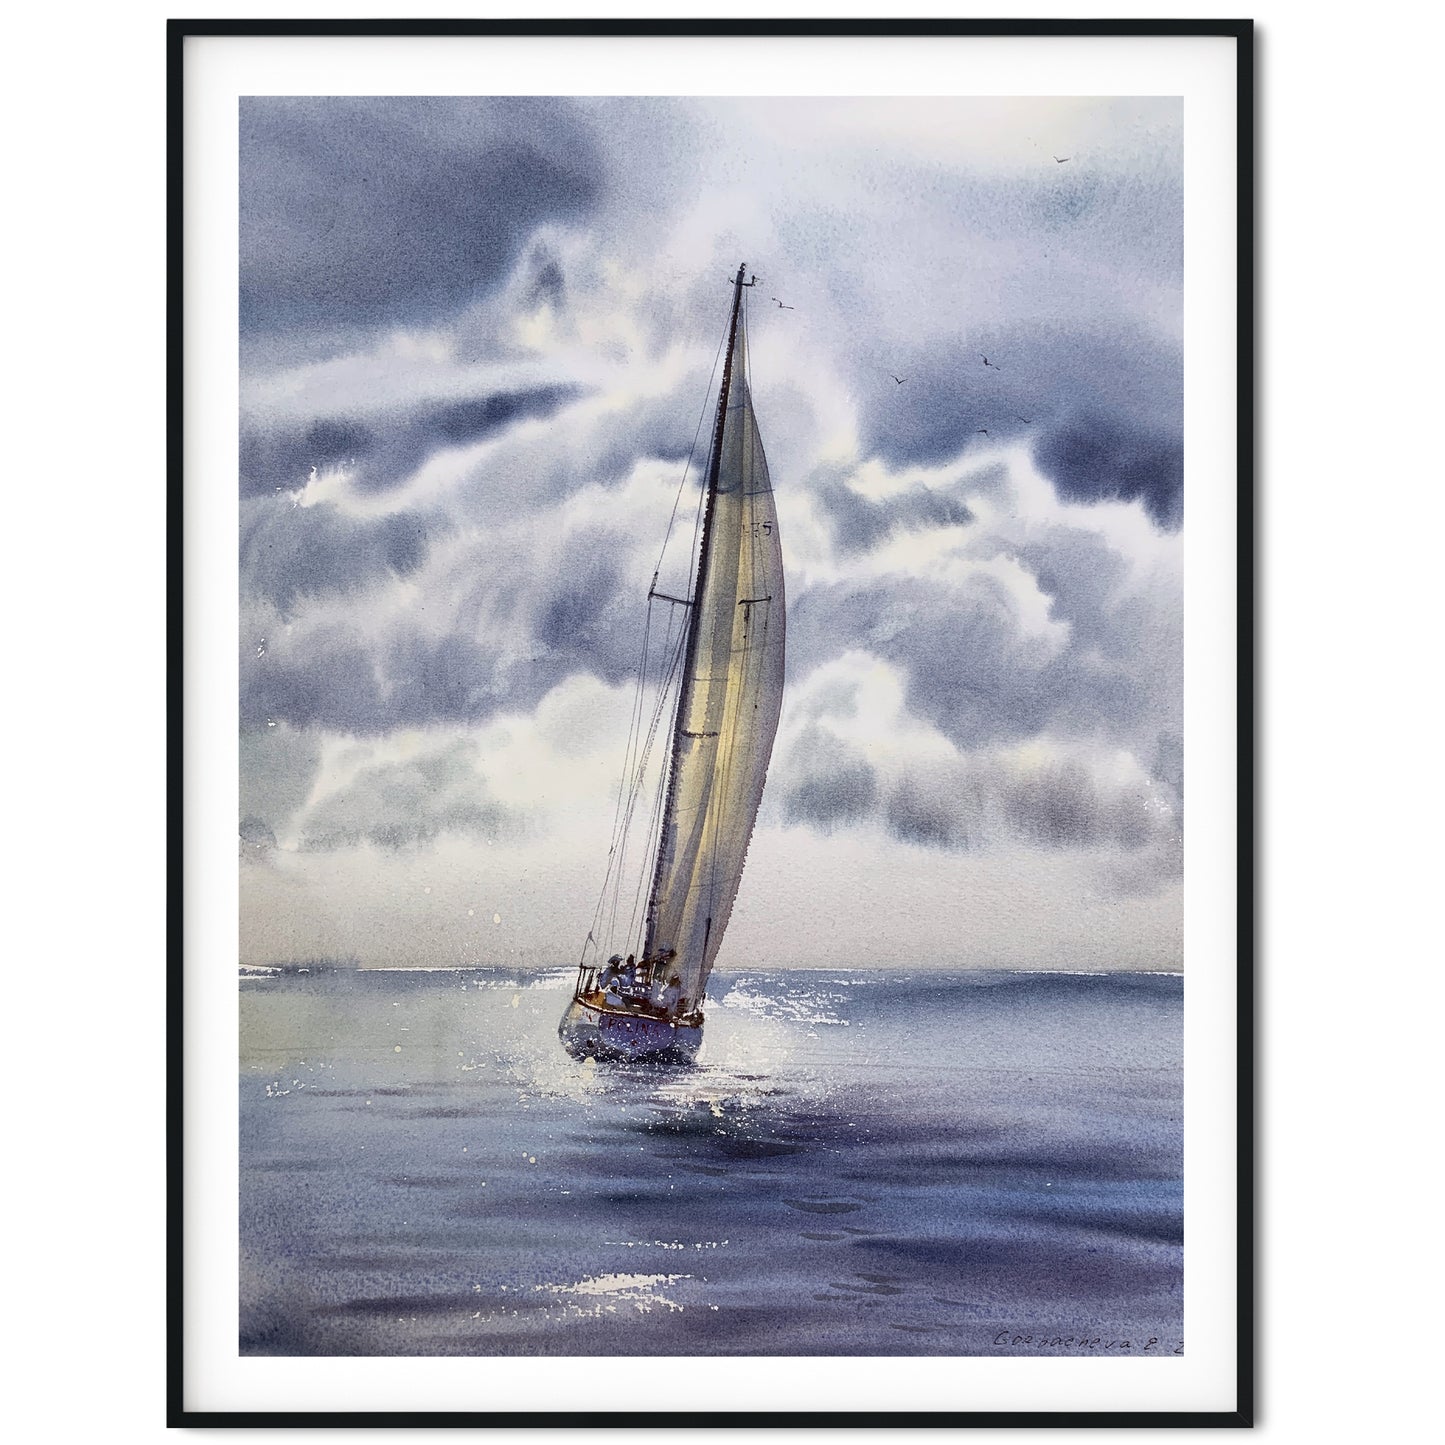 Tailwinds #4 Watercolor Painting - Stunning Seascape Art - Unique Gift for Any Occasion